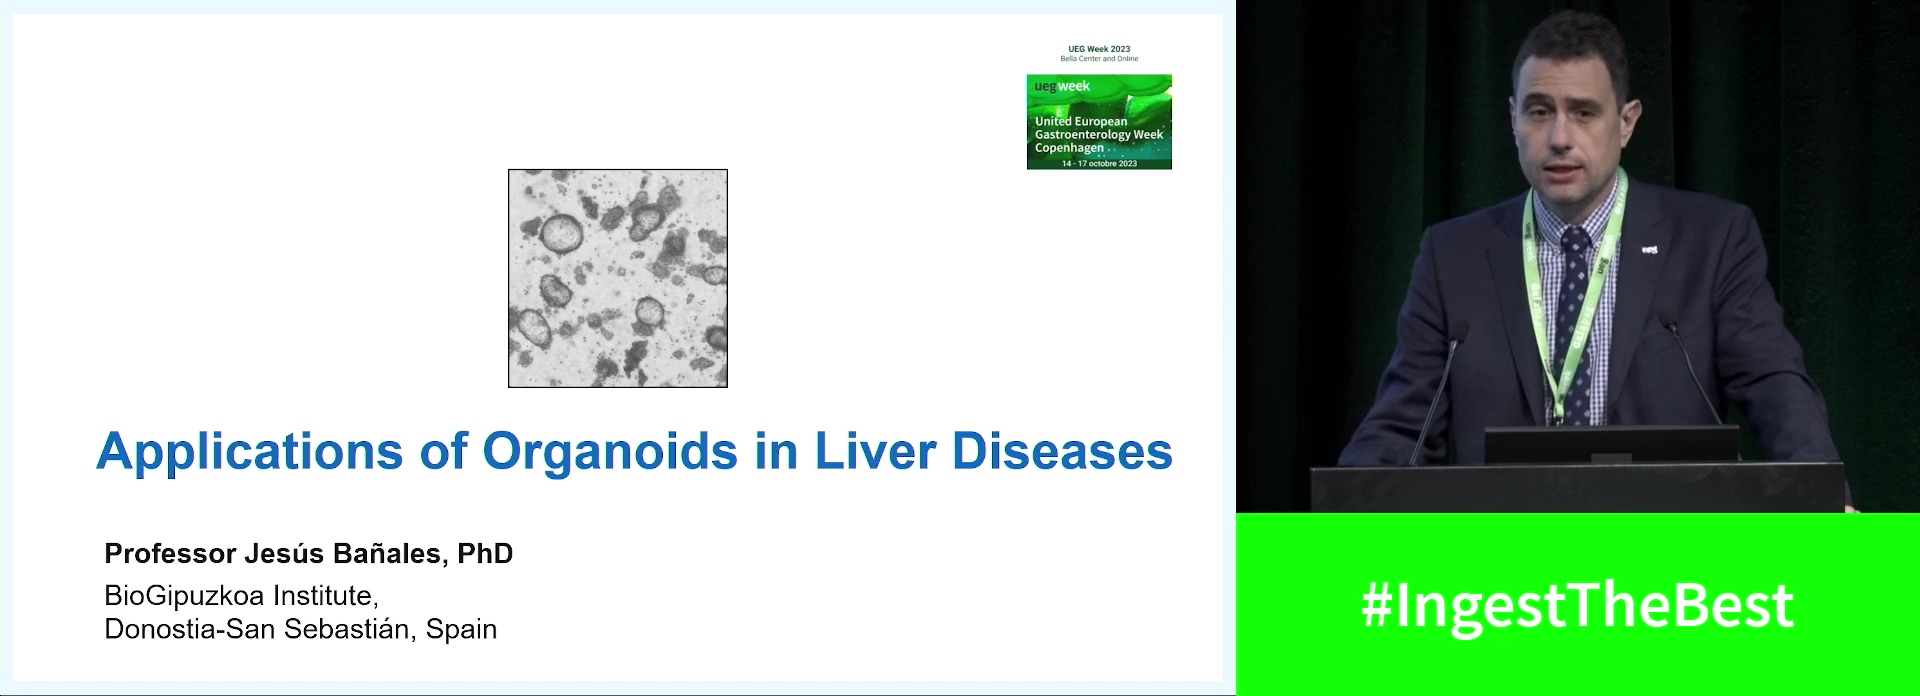 Applications of organoids in liver diseases